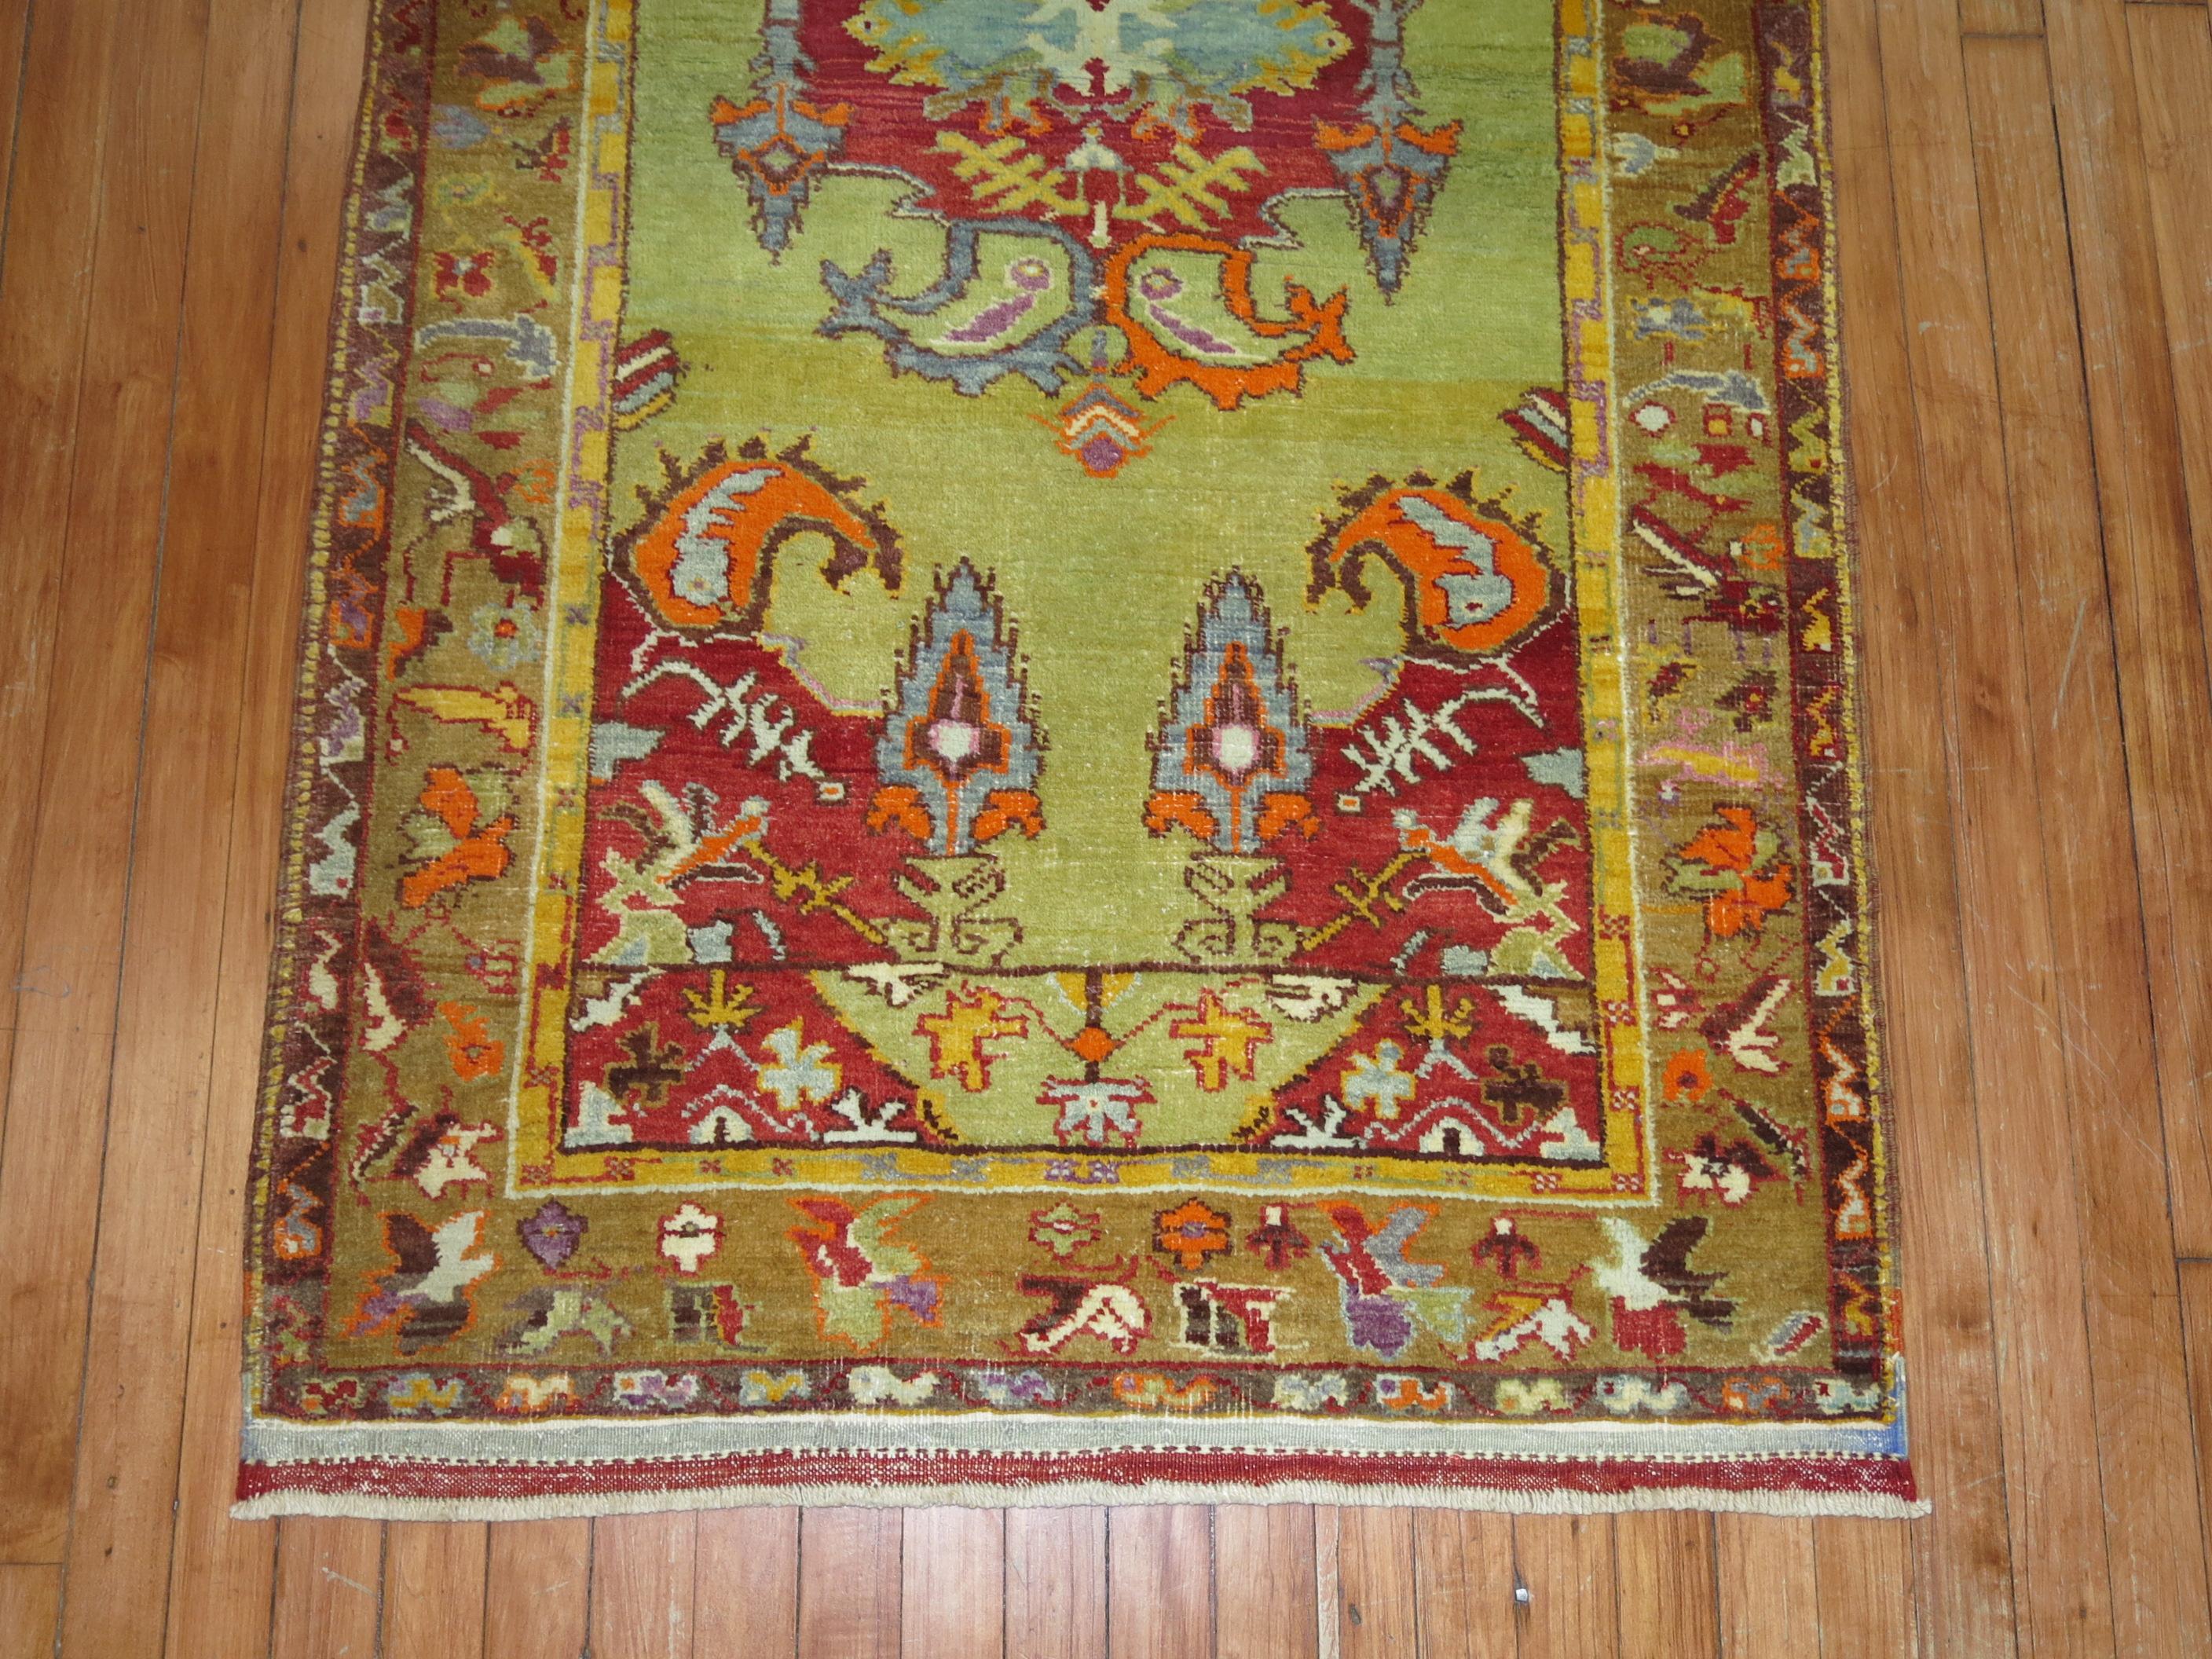 A fascinating mid-20th century Persian runner with an open lime green field. Accents in pumpkin, yellow, brown and red. All the colors are original which is quite remarkable. A statement piece.

Measures: 3'2